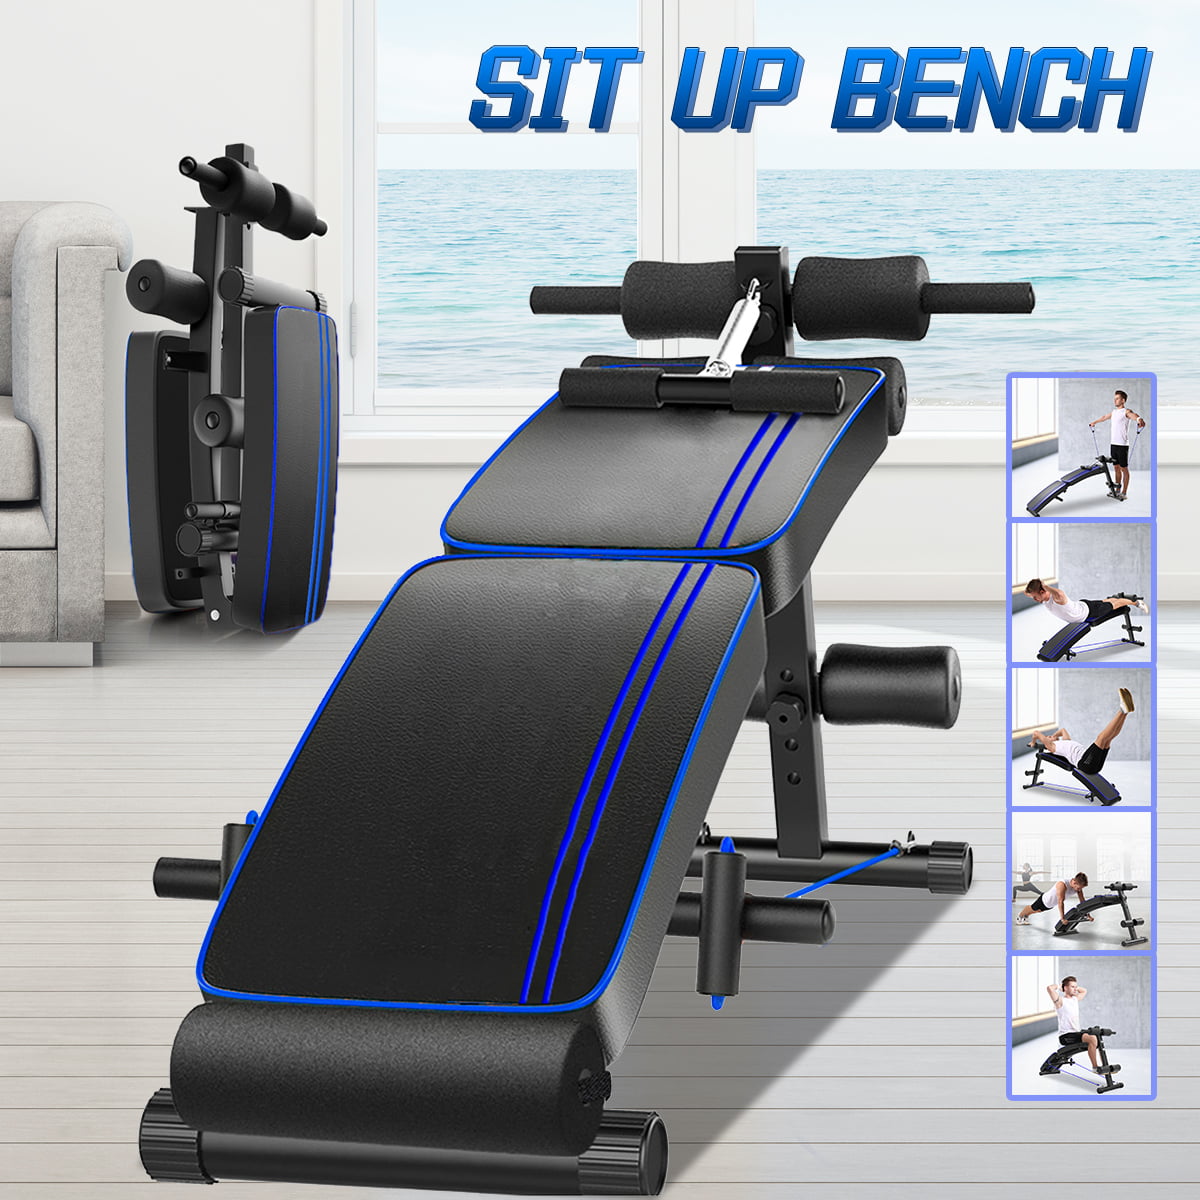 30 Minute Small portable workout bench 